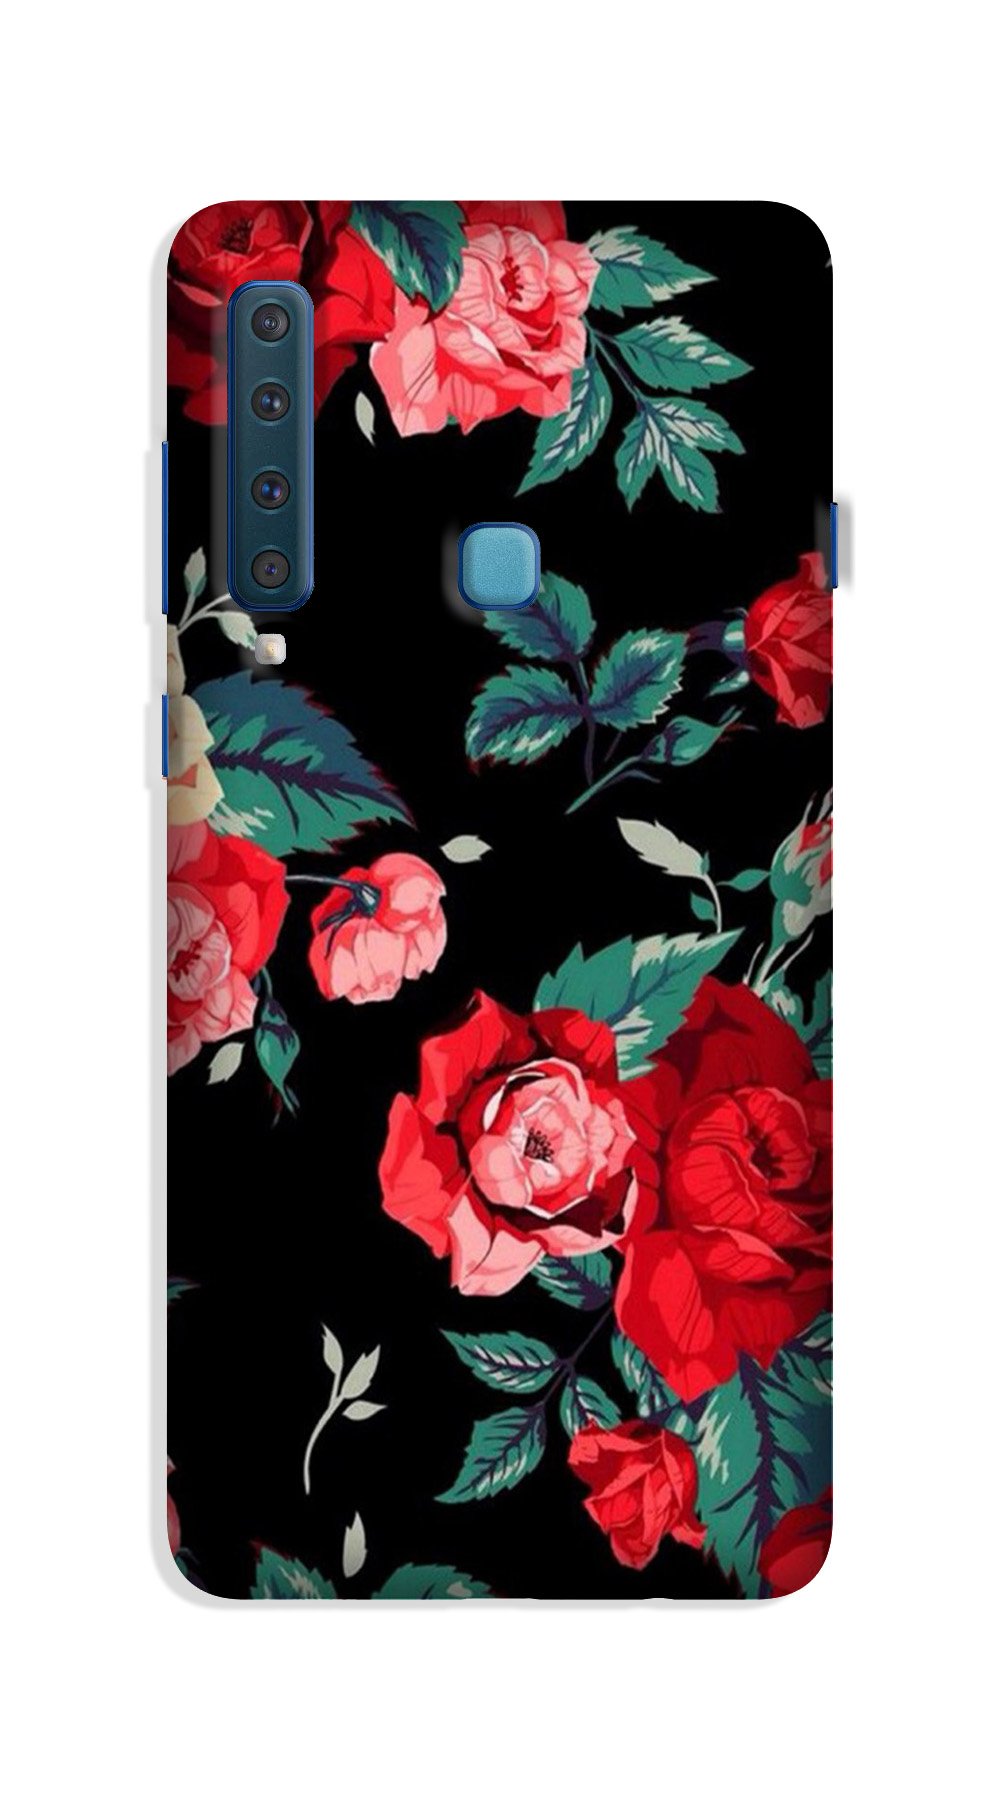 Red Rose2 Case for Galaxy A9 (2018)